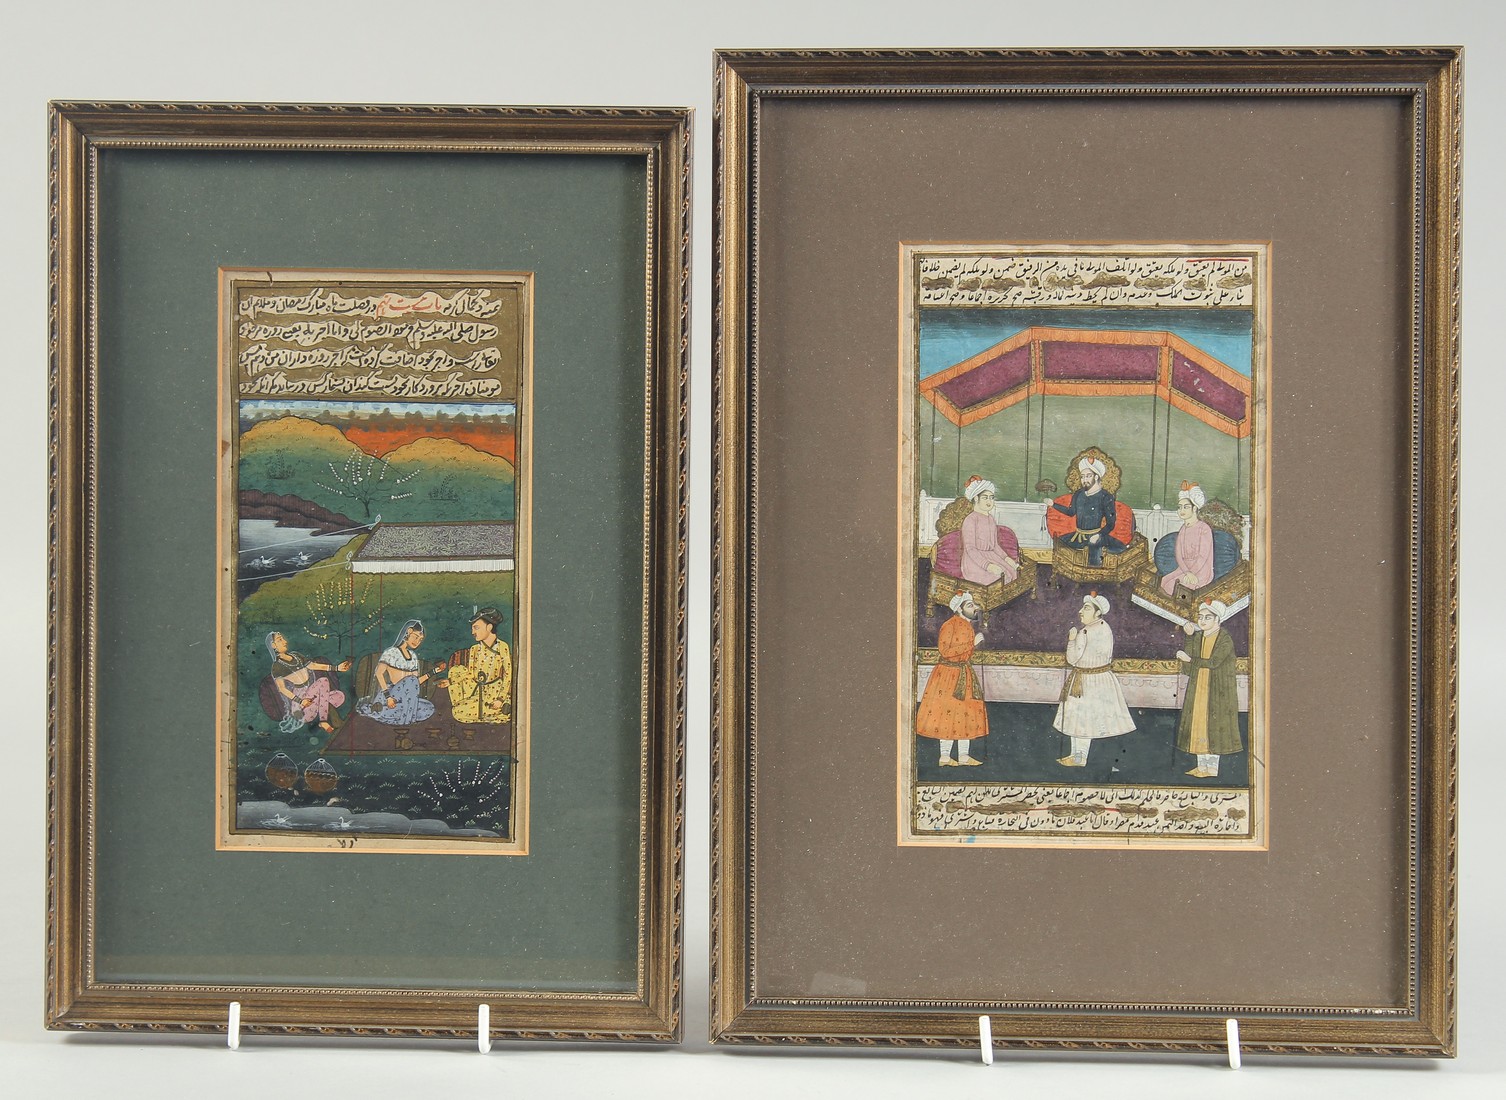 TWO ISLAMIC ILLUMINATED MANUSCRIPT PAGES, each finely painted with scenes of figures and panels of